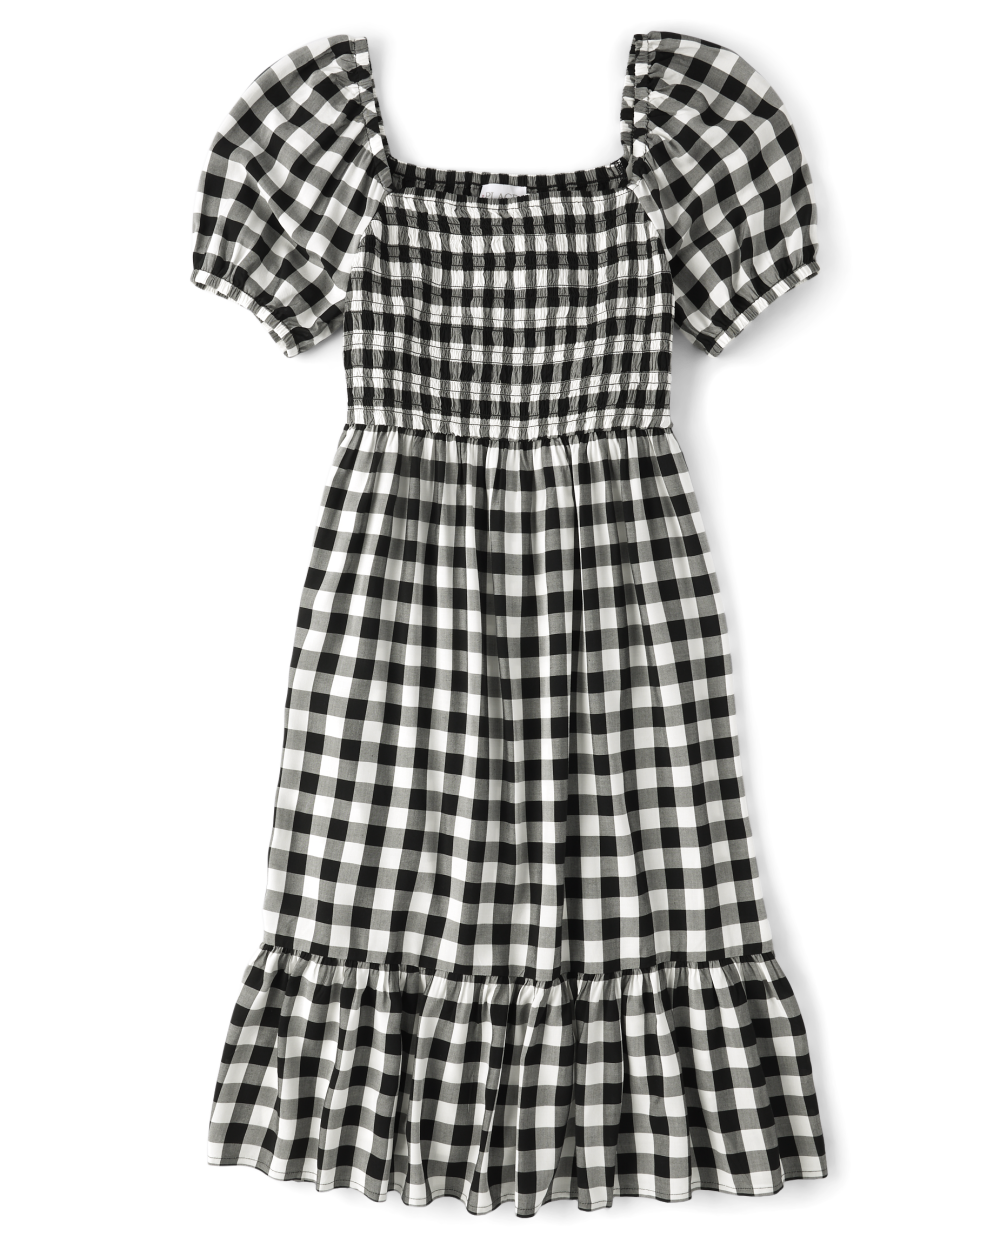 Puff Sleeves Short Sleeves Sleeves Rayon Above the Knee Smocked Square Neck Checkered Gingham Print Dress With Ruffles